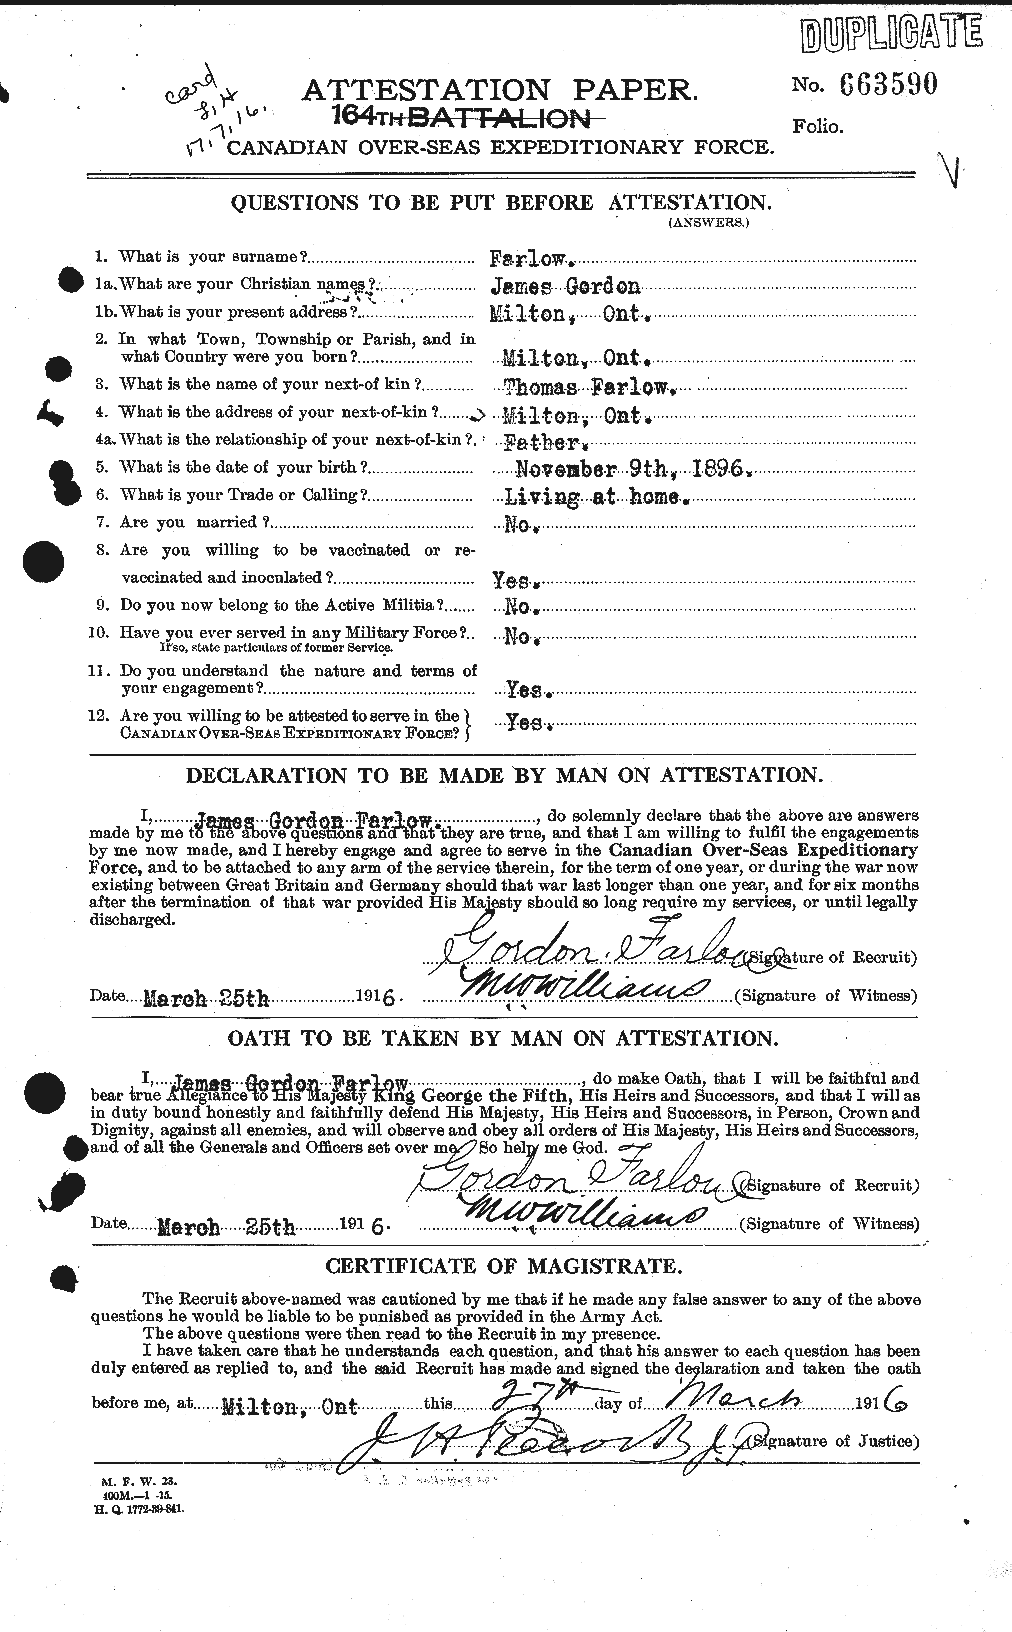 Personnel Records of the First World War - CEF 317915a